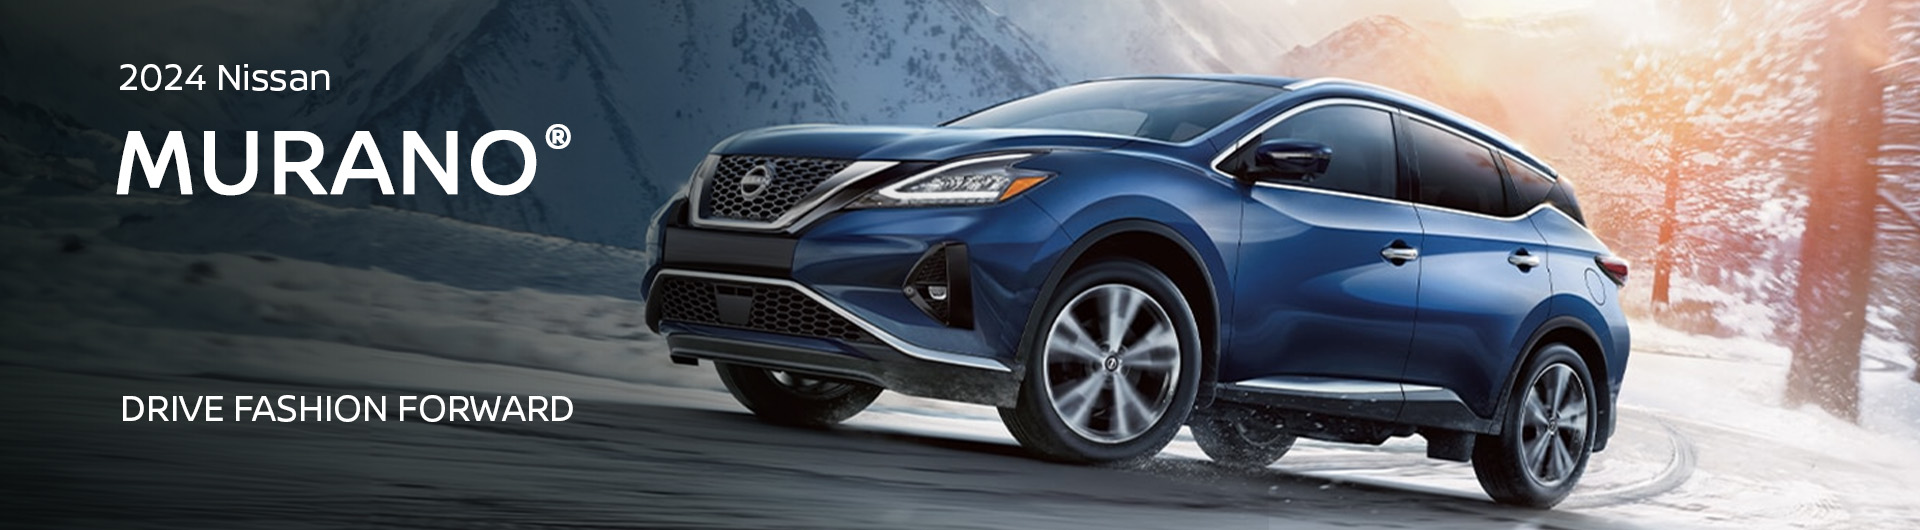  A New Nissan Murano® Available at Younger Nissan of Frederick in Frederick, MD